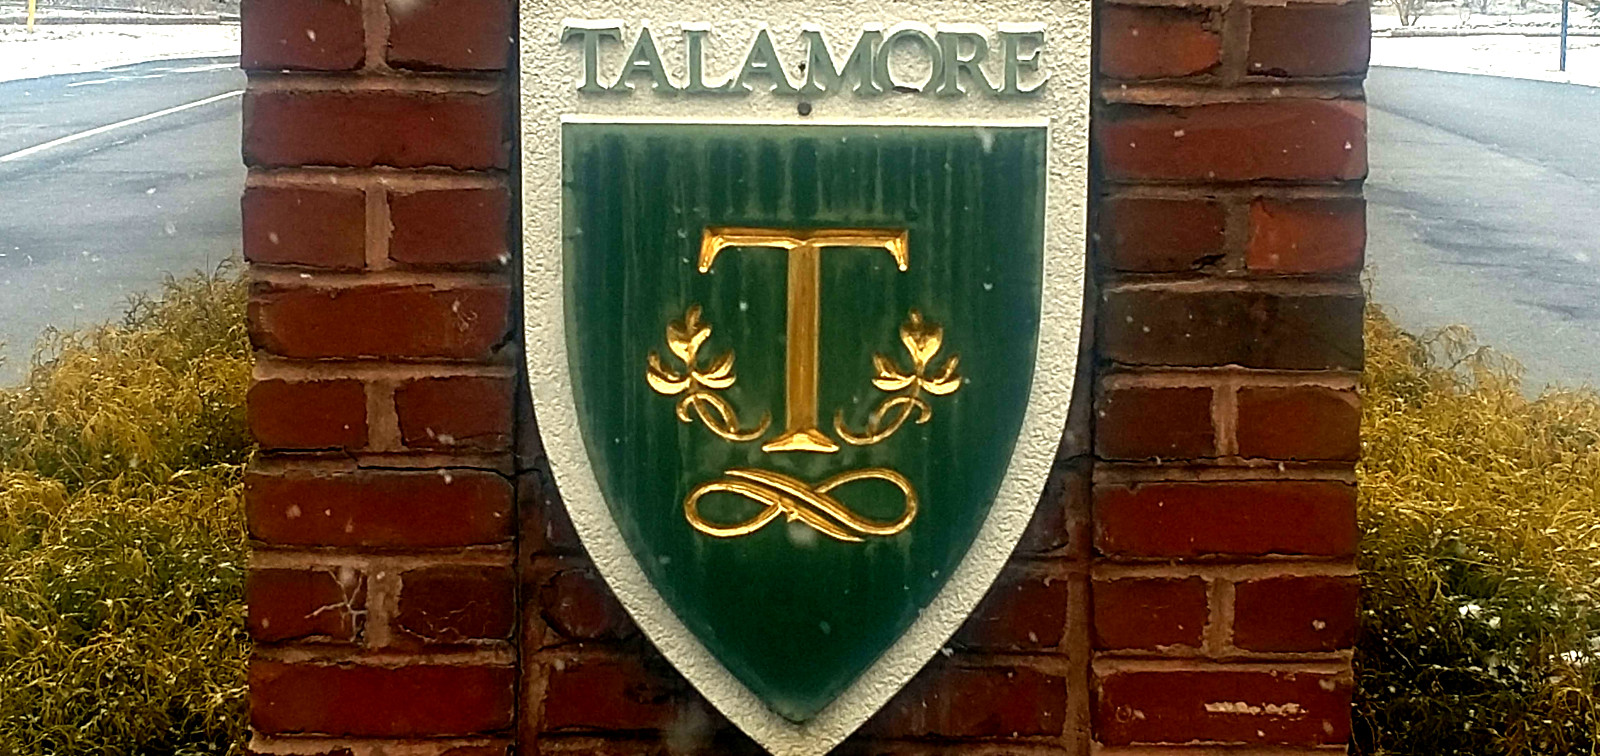 sign on brick pedestal with word Talamore above and large gold letter T in middle of green shield below